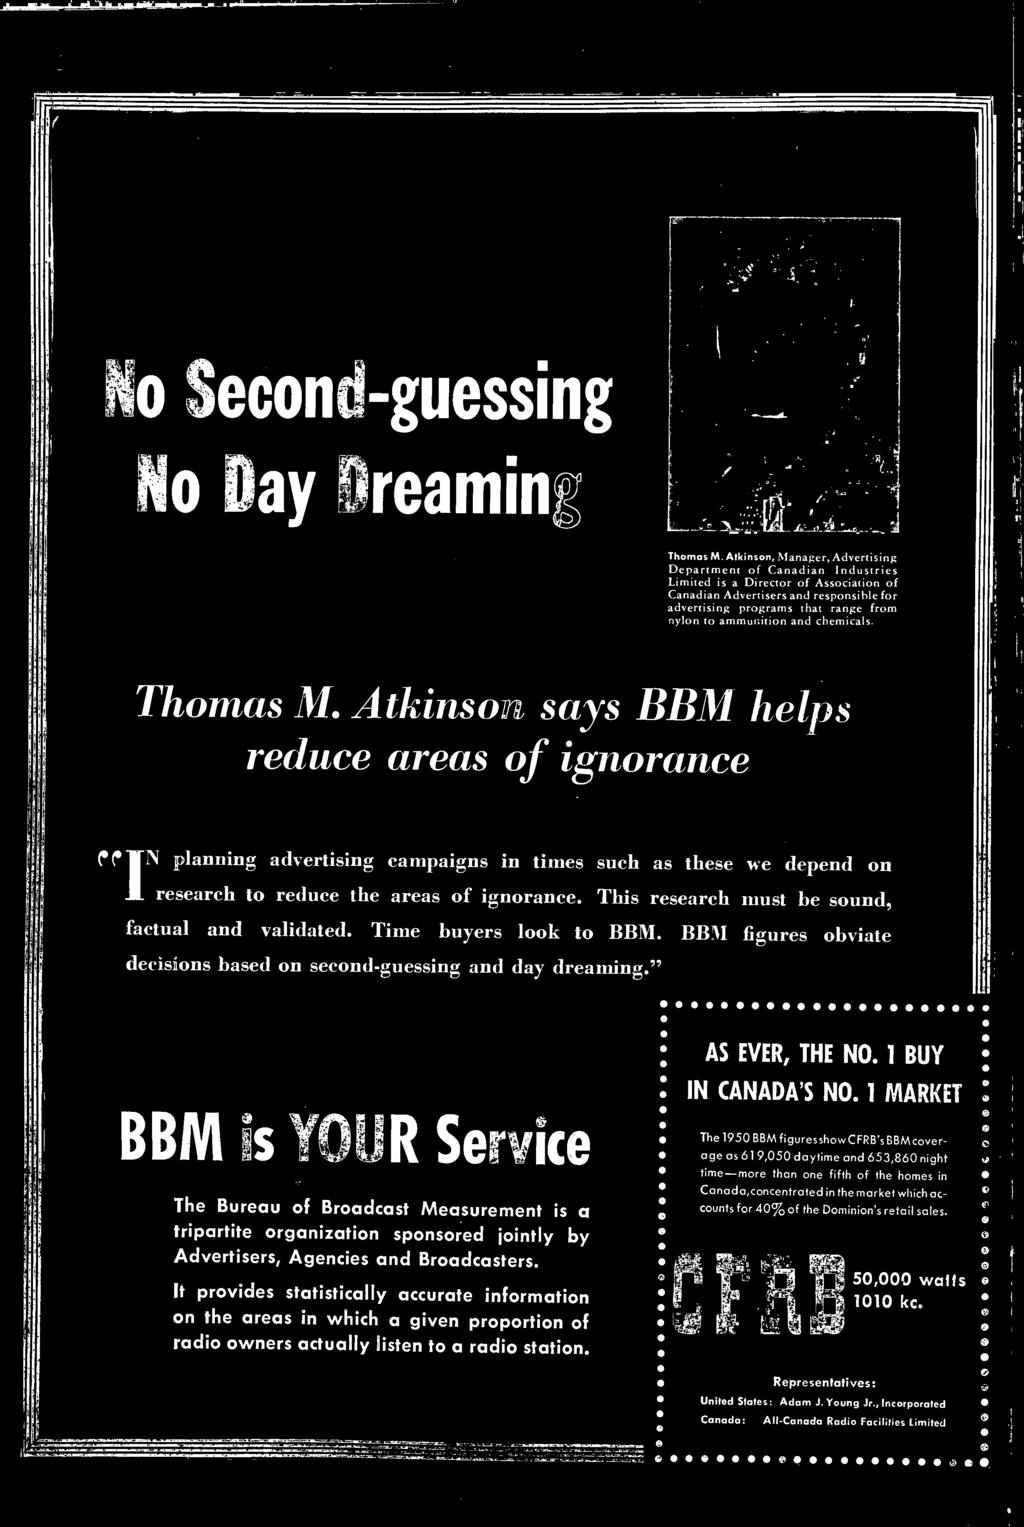 Thoms M. Atkinson sys BBM helps reduce res of ignornce (C N plnning dvertising cmpigns in times such s these we depend on reserch to reduce the res of ignornce.